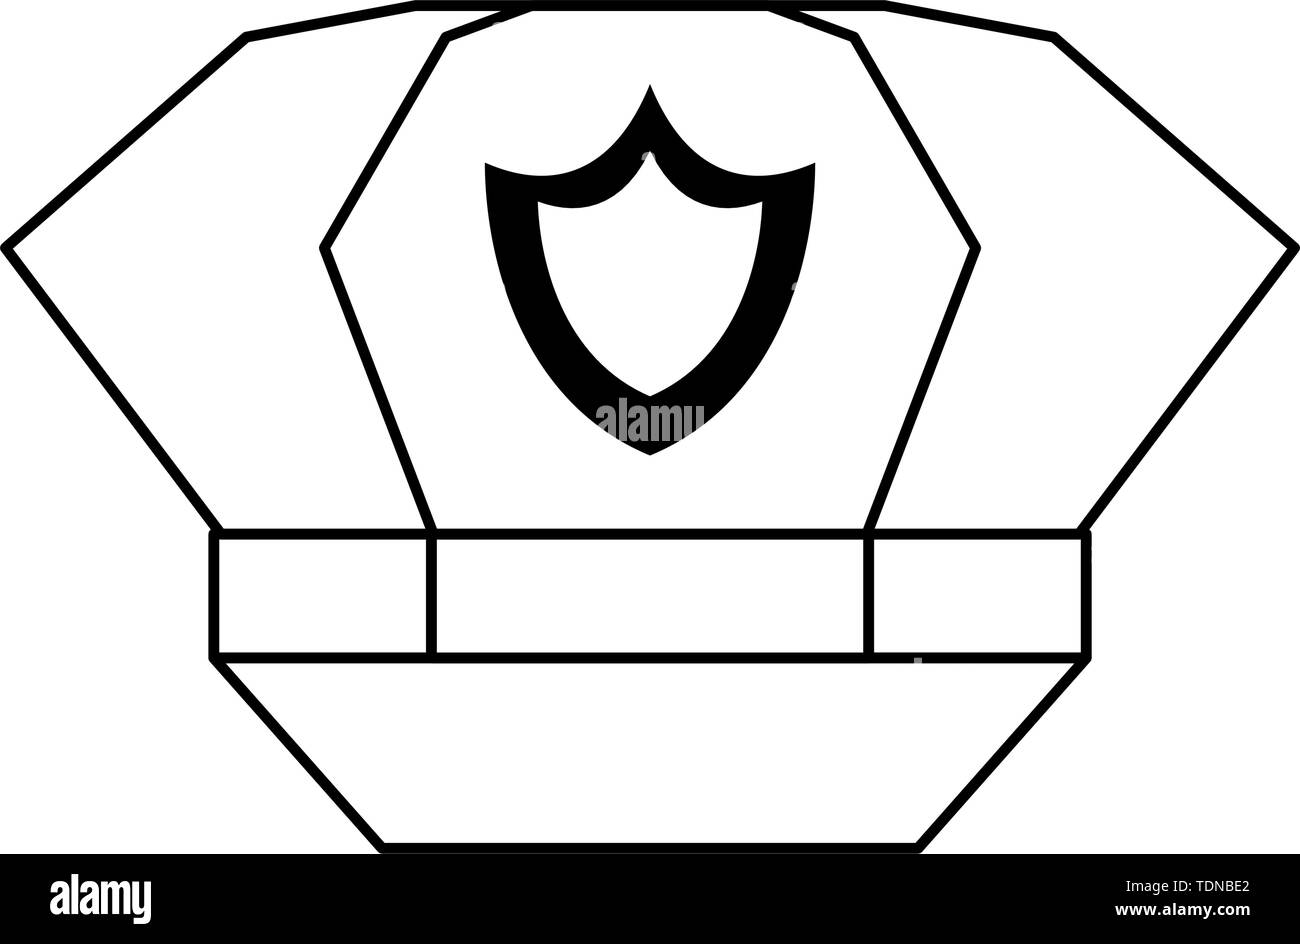 Police cap with badge symbol isolated in black and white stock vector image art